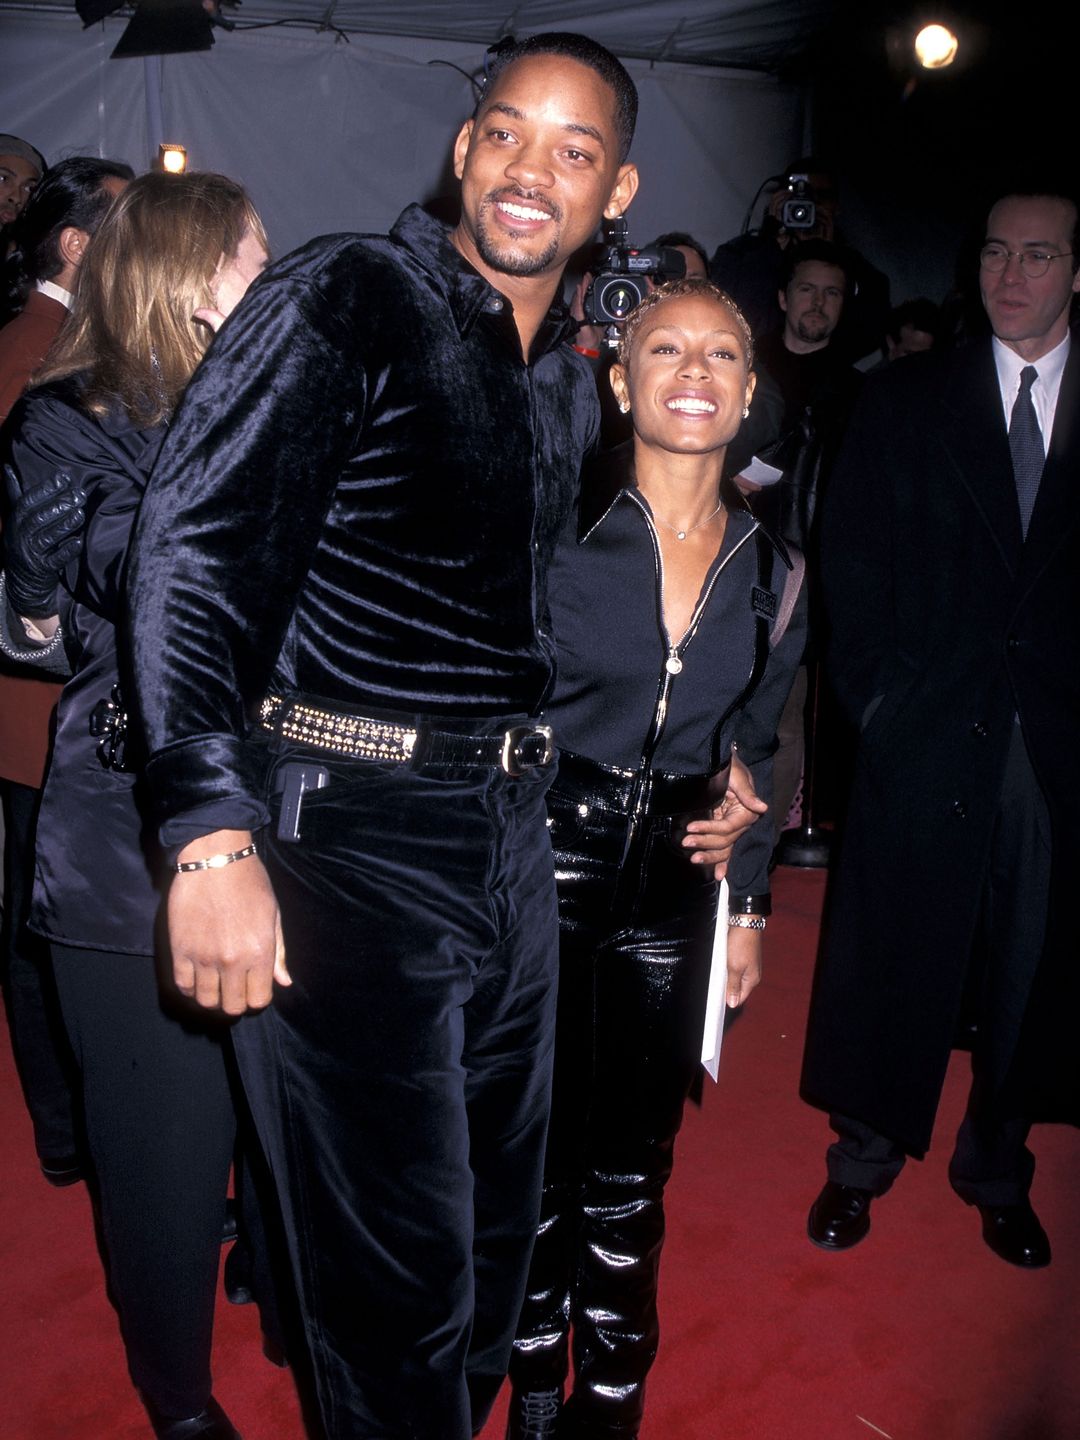 Jada and Will smiling in an old photo from a red carpet event